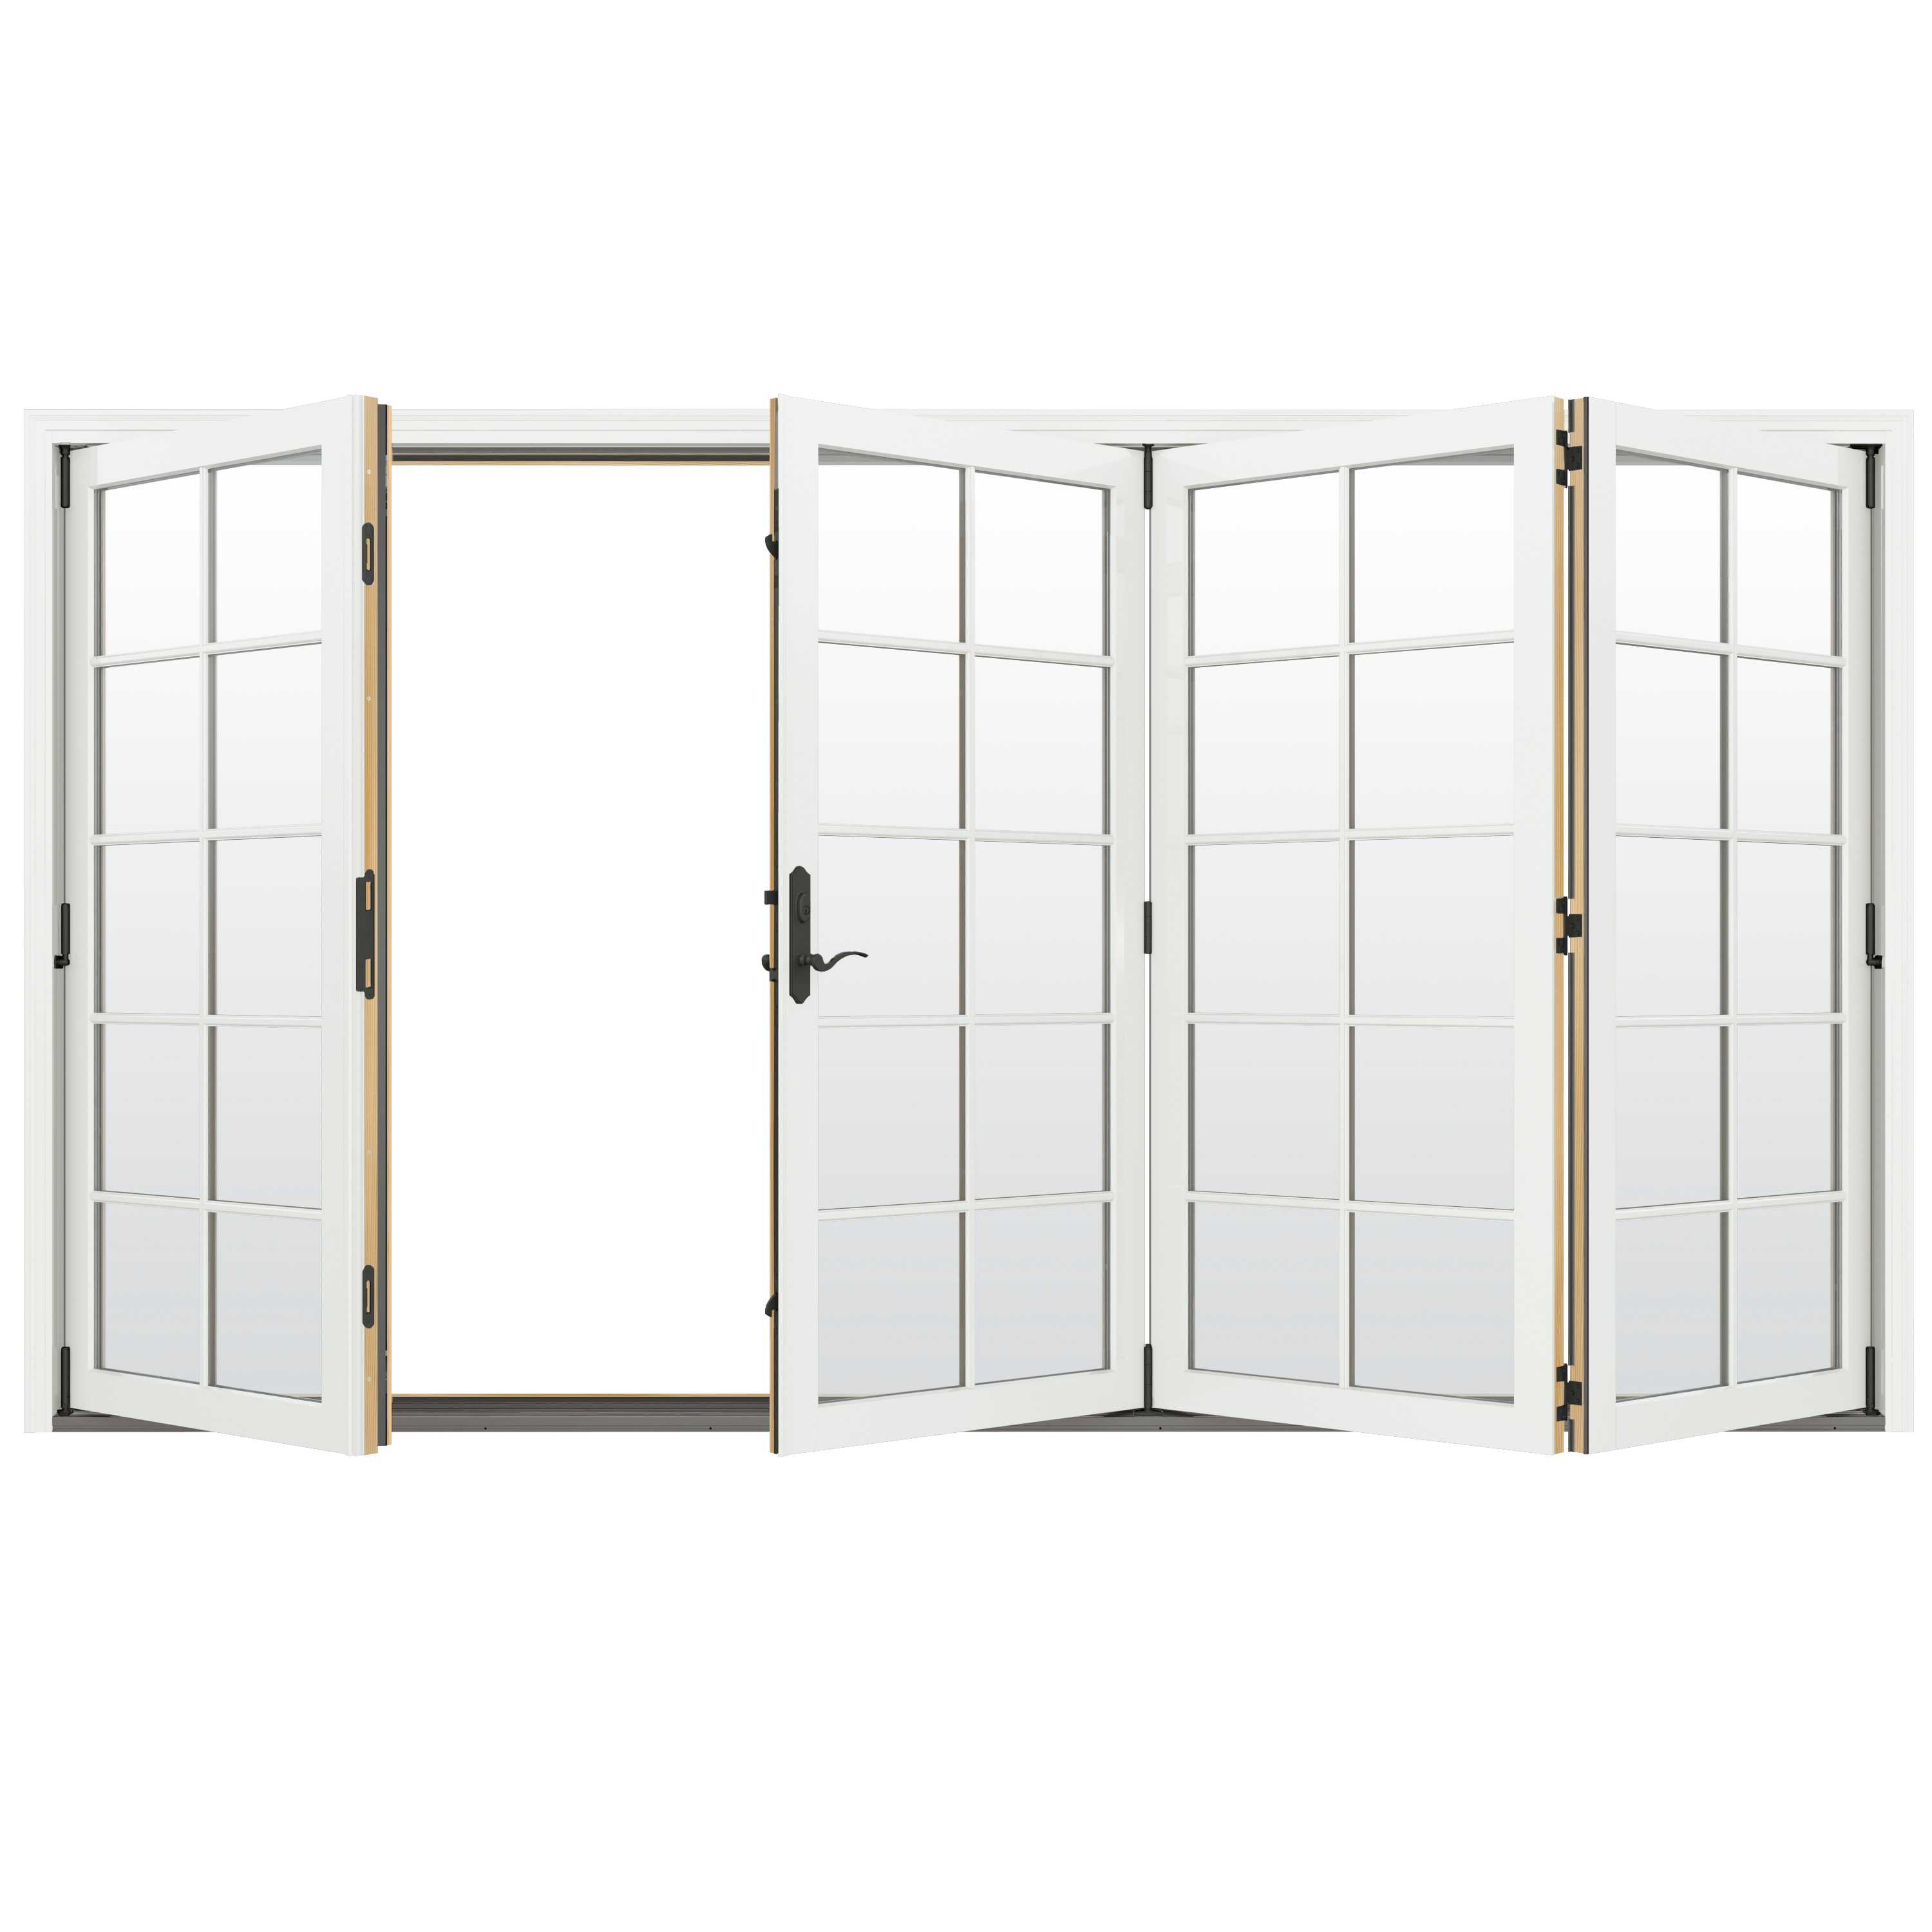 124-in x 96-in Low-e Argon Simulated Divided Light White Clad-wood Folding Right-Hand Outswing Patio Door | - JELD-WEN LOWOLJW247800082